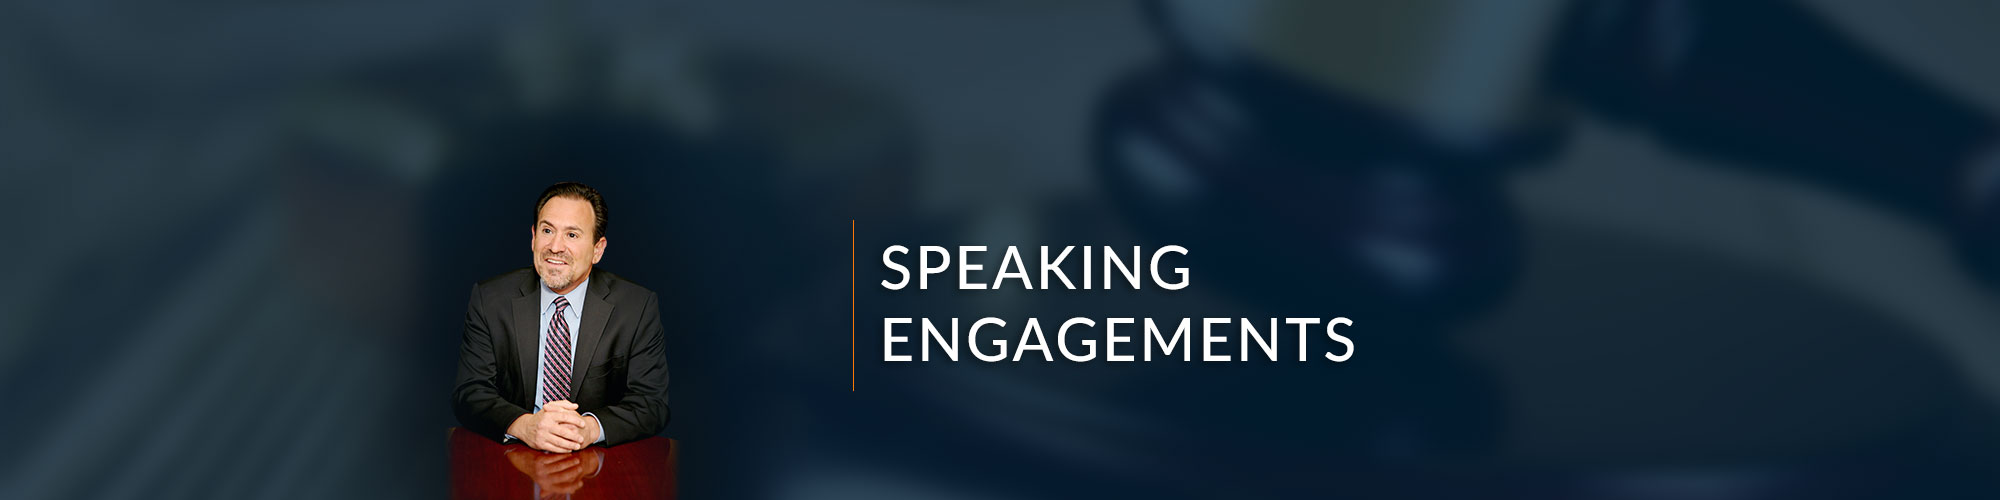 speaking engagements law